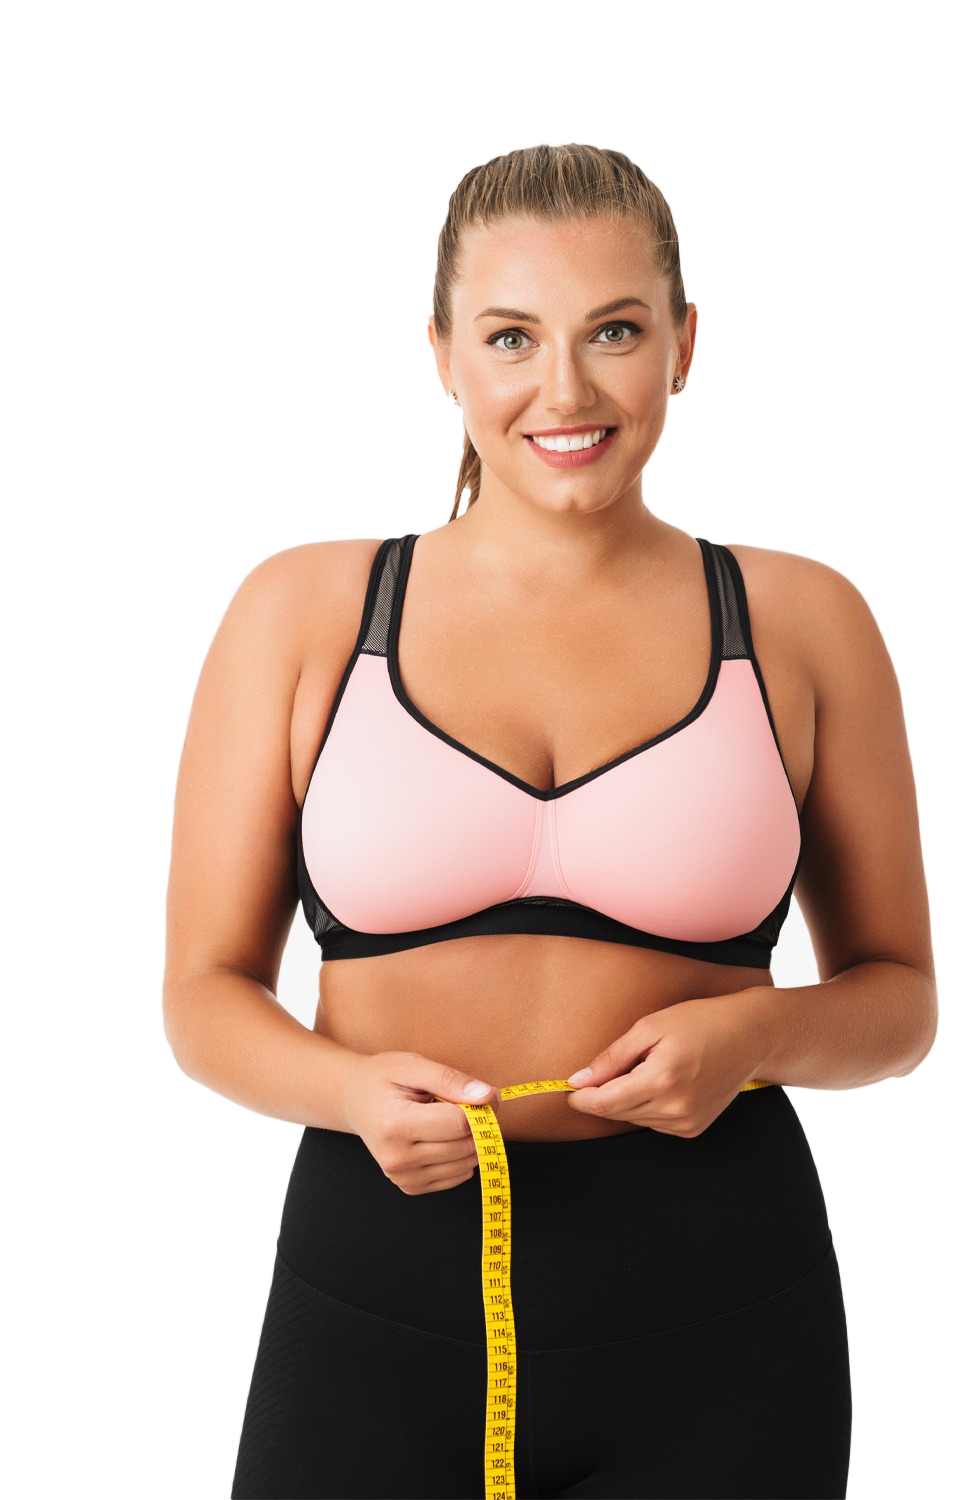 You Can Now Use Your HSA/FSA On Semaglutide Weight Loss! - Complete  Wellness, Missouri City, TX